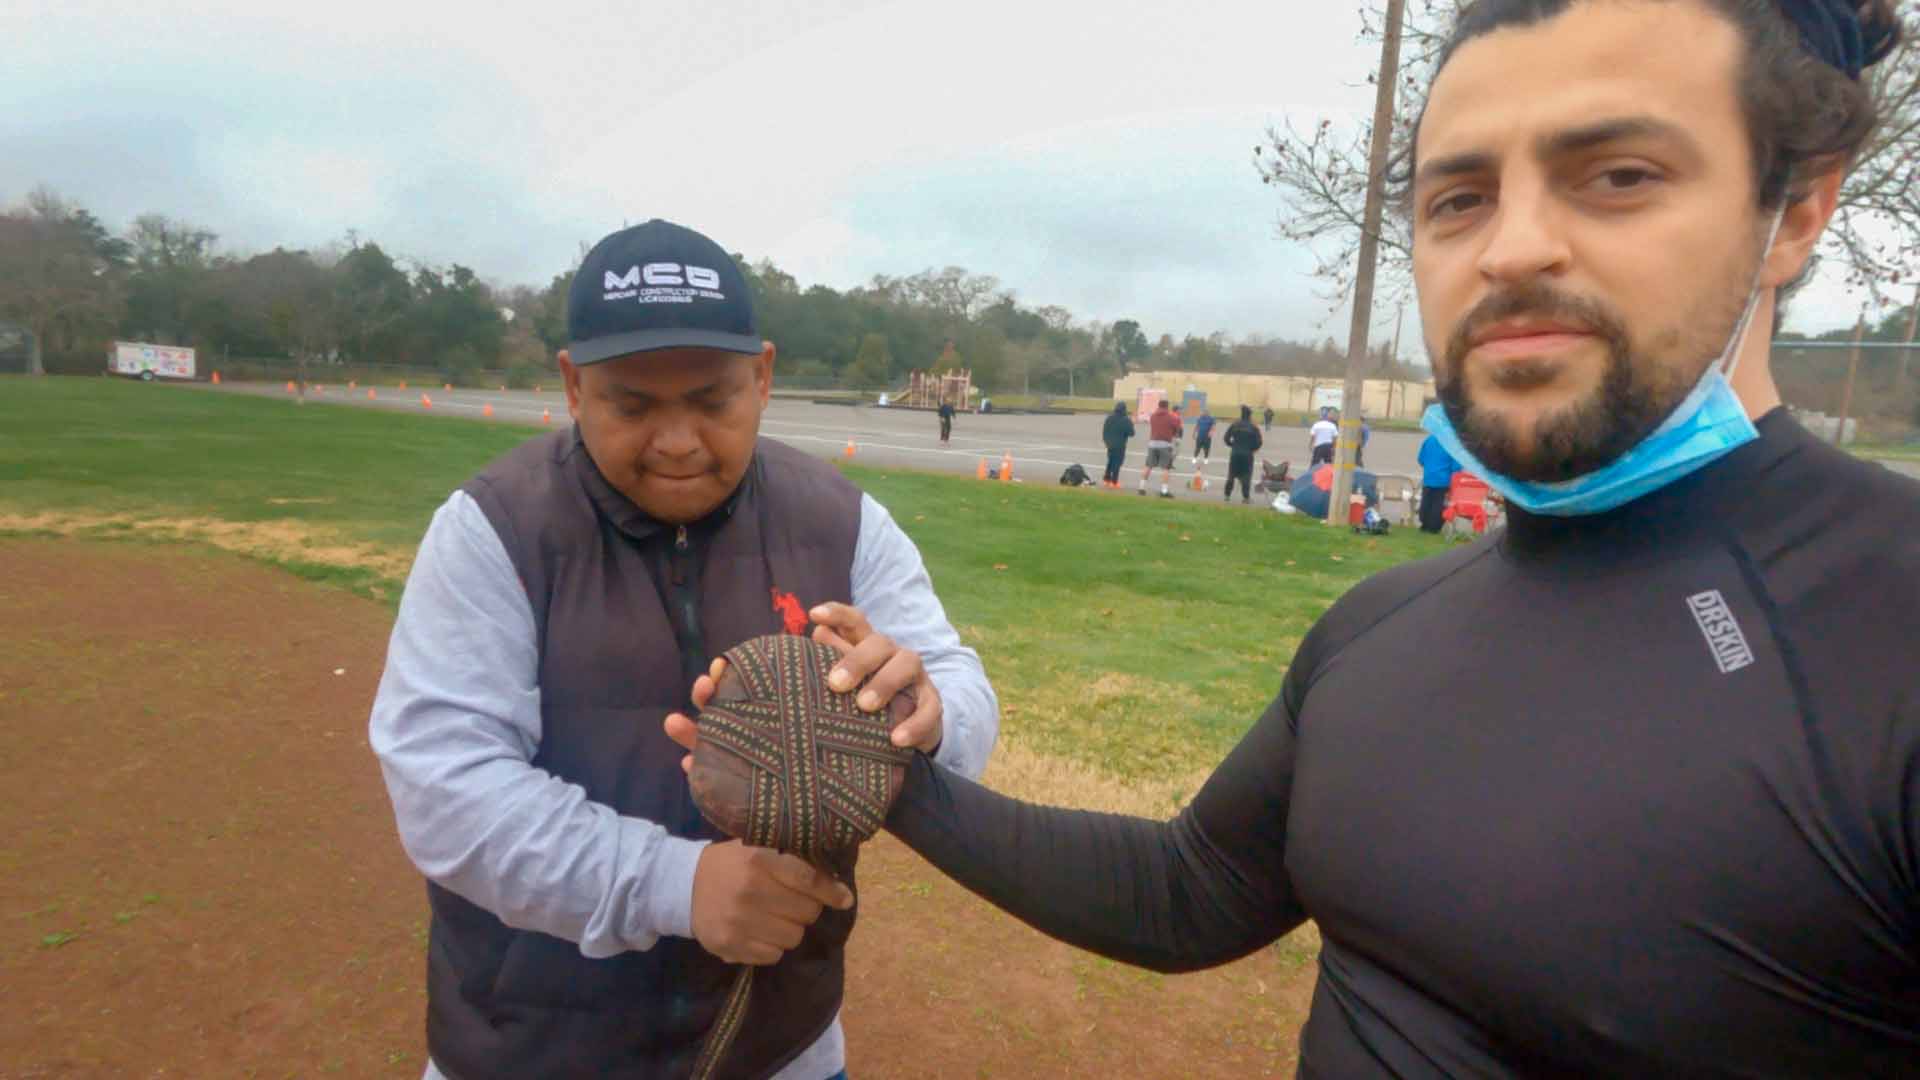 Northern California Vlogger trying on a Mixtec Ball Glove